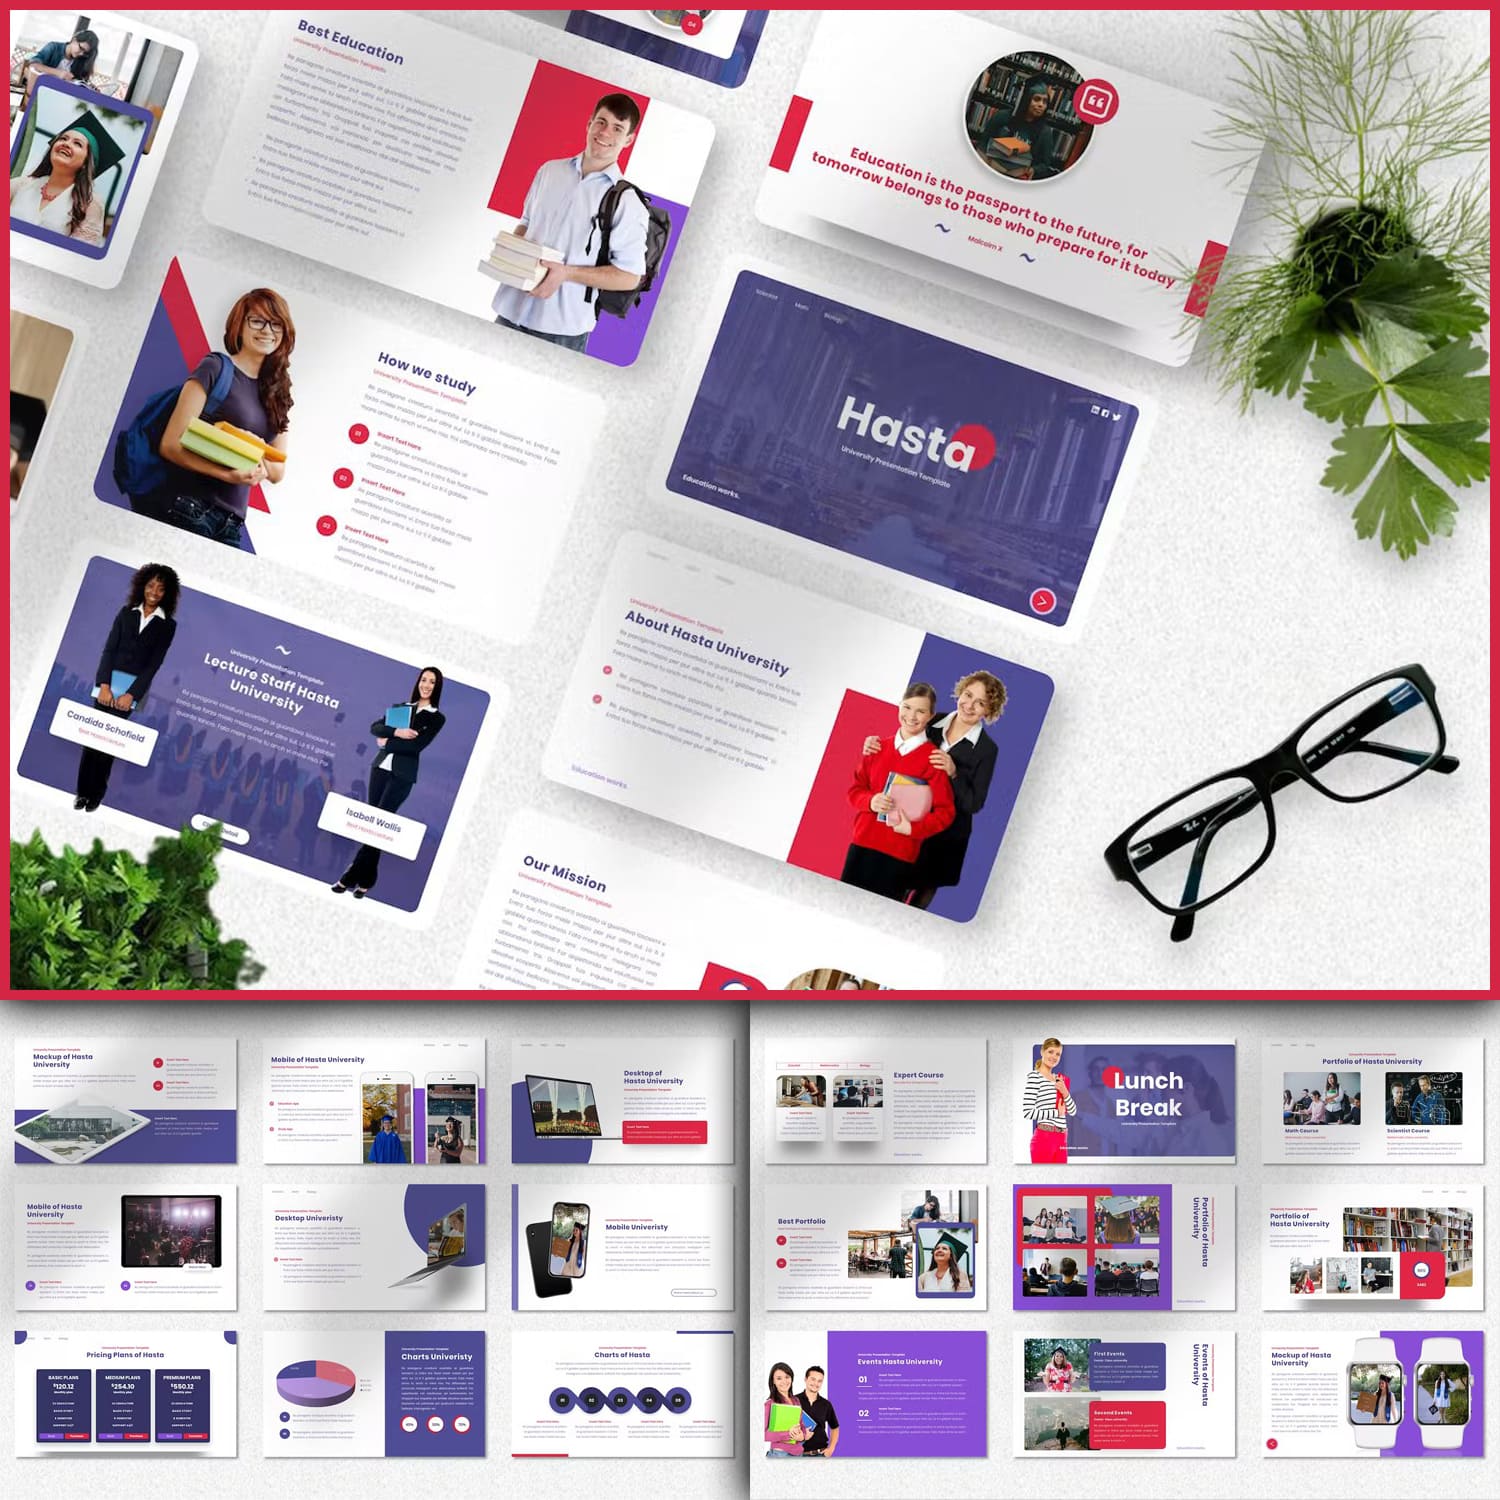 Hasta University Powerpoint Template - main image preview.